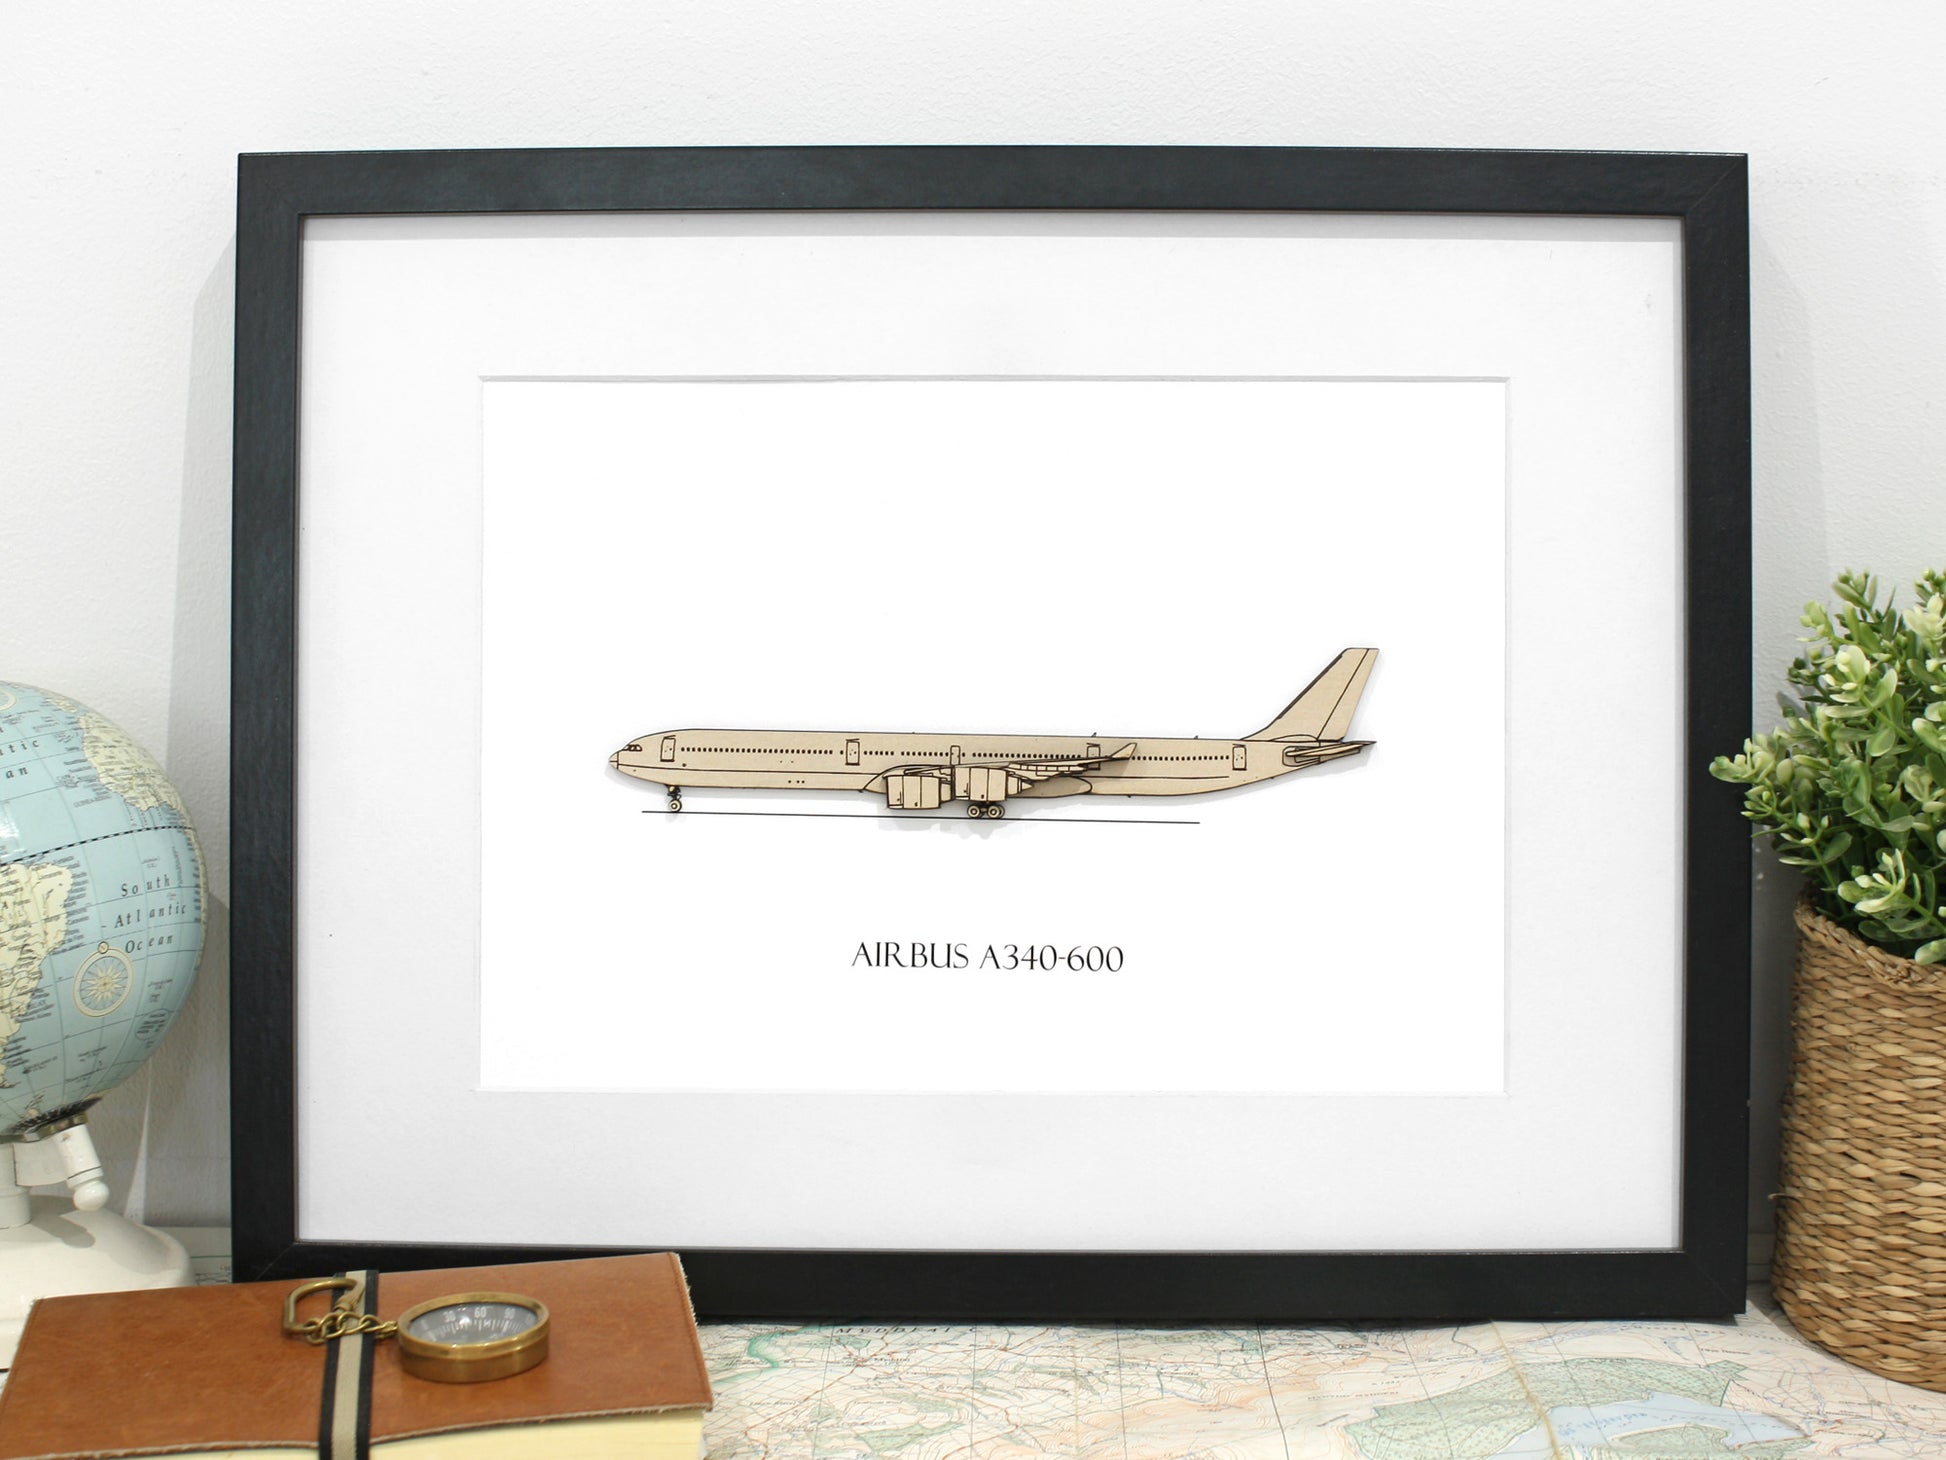 Airbus A340-600 pilot gifts